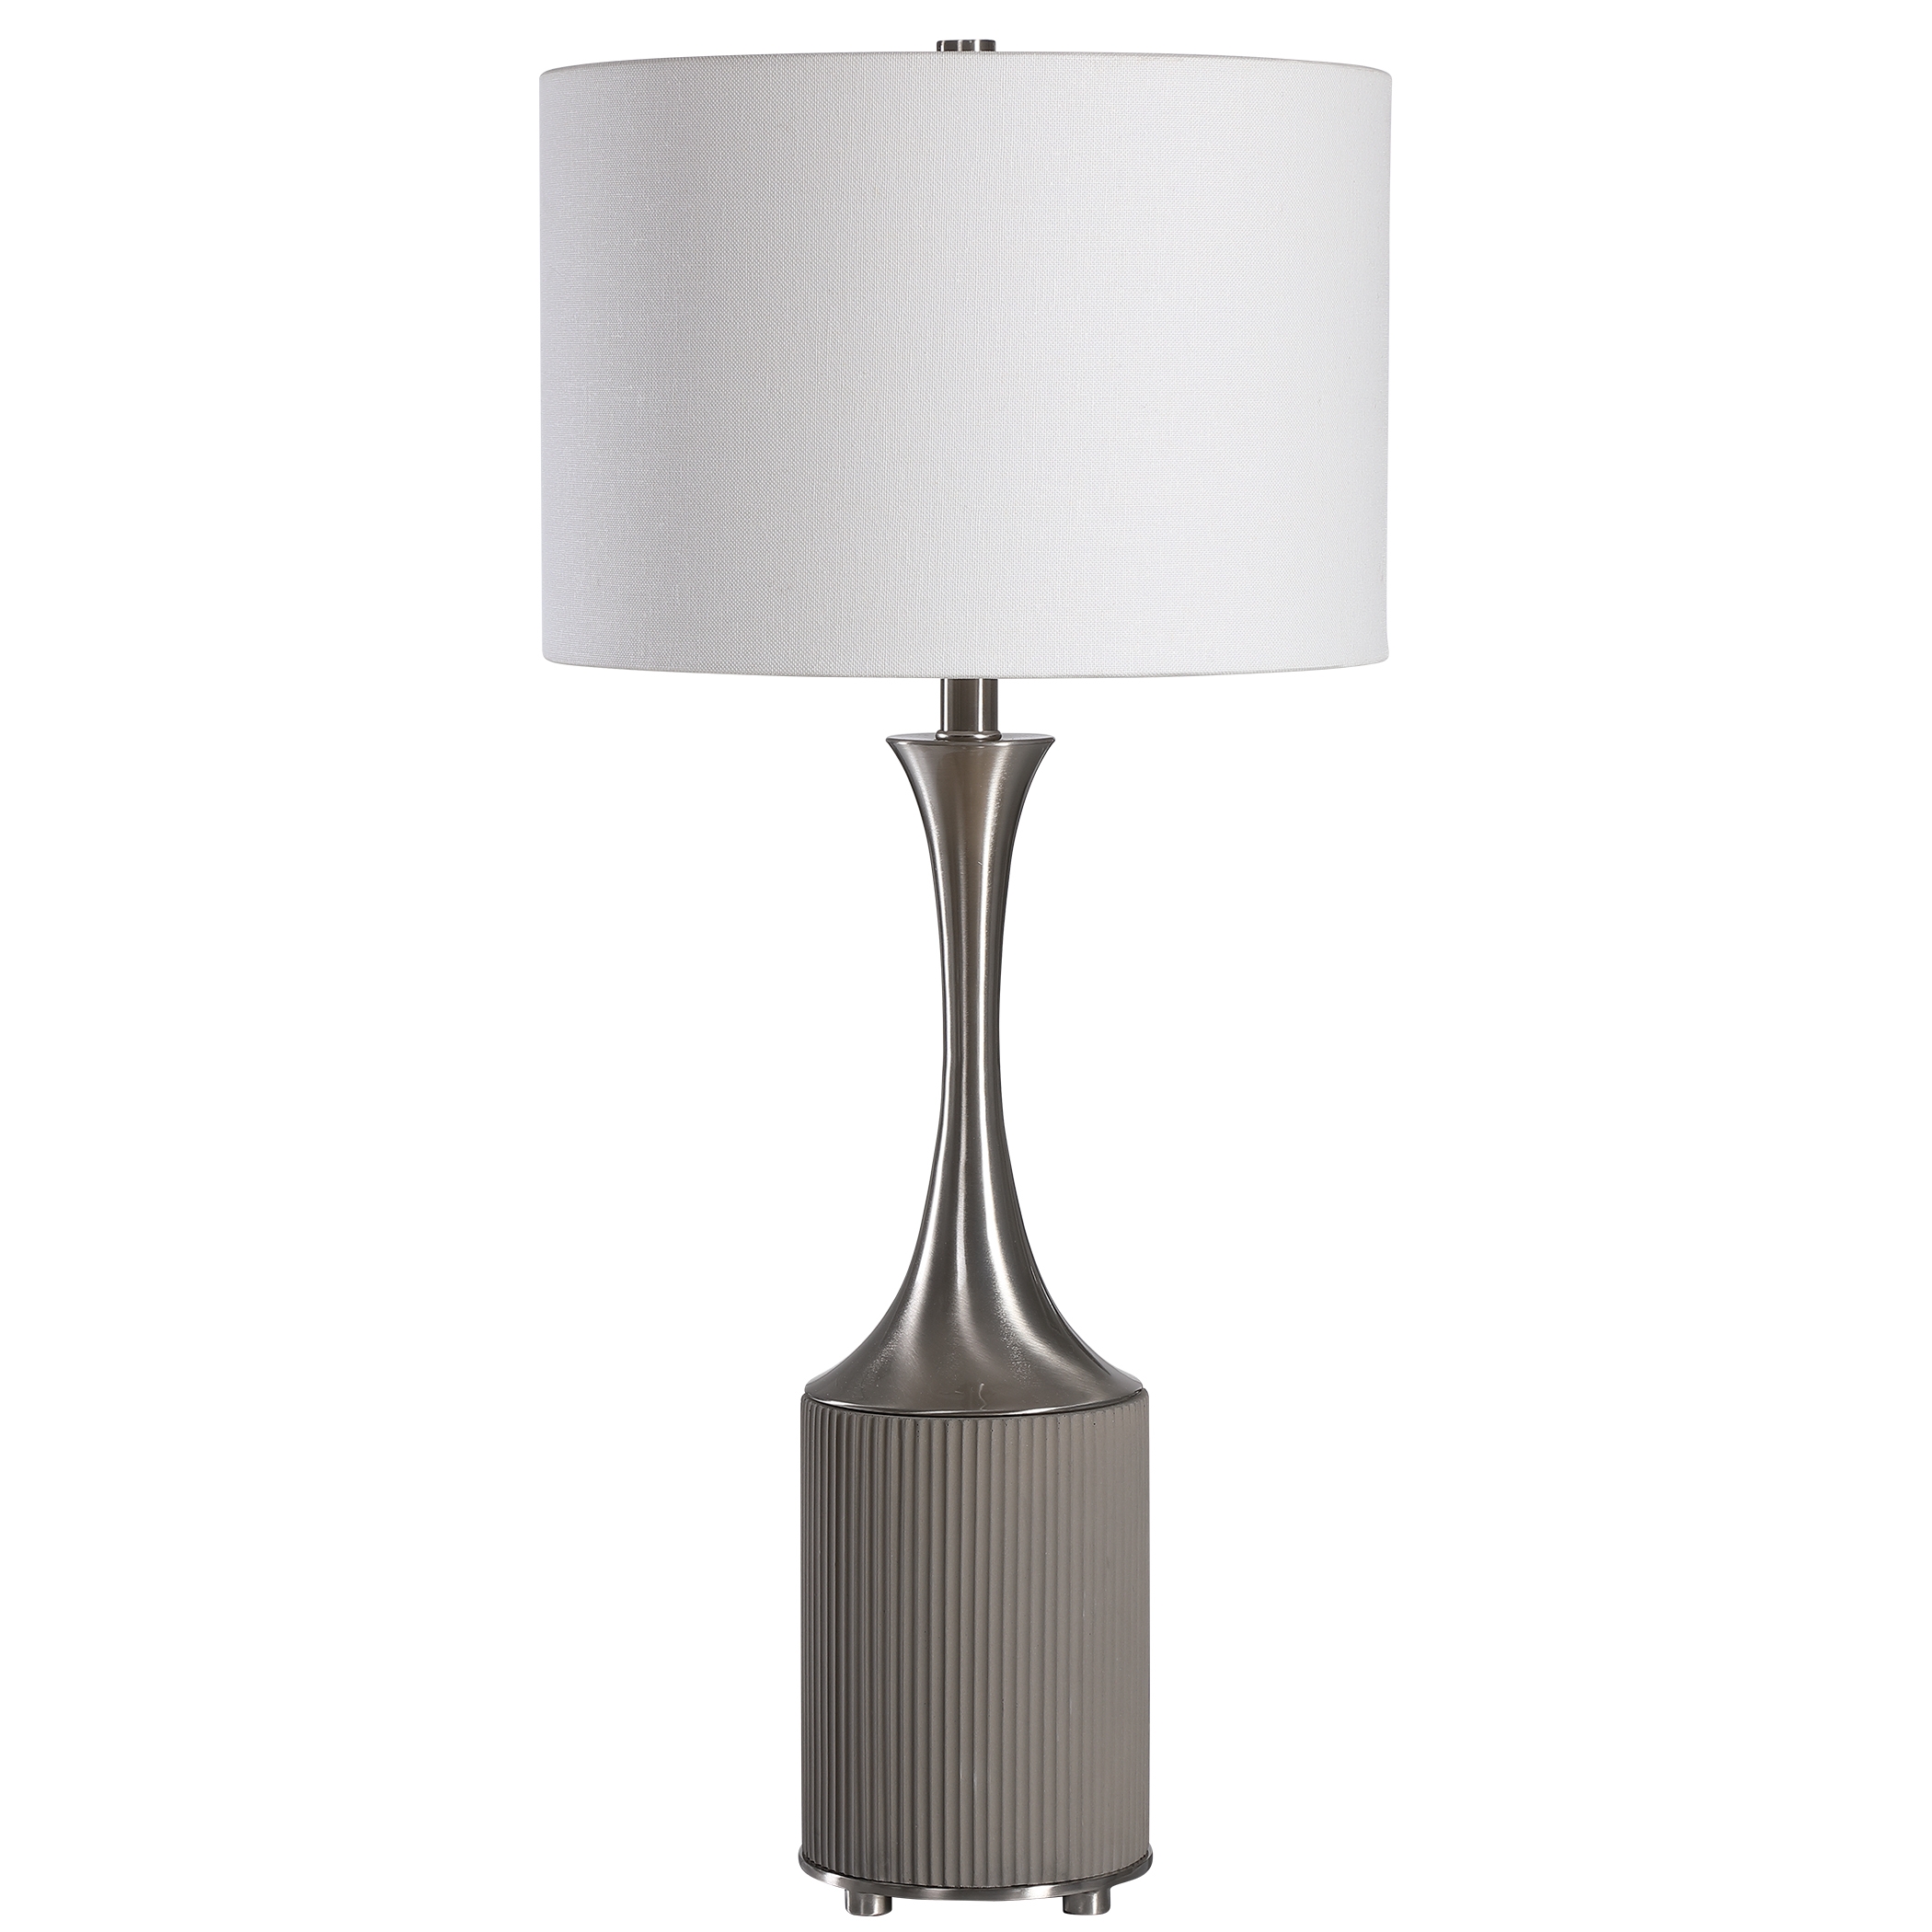 Pitman Industrial Table Lamp - Image 2